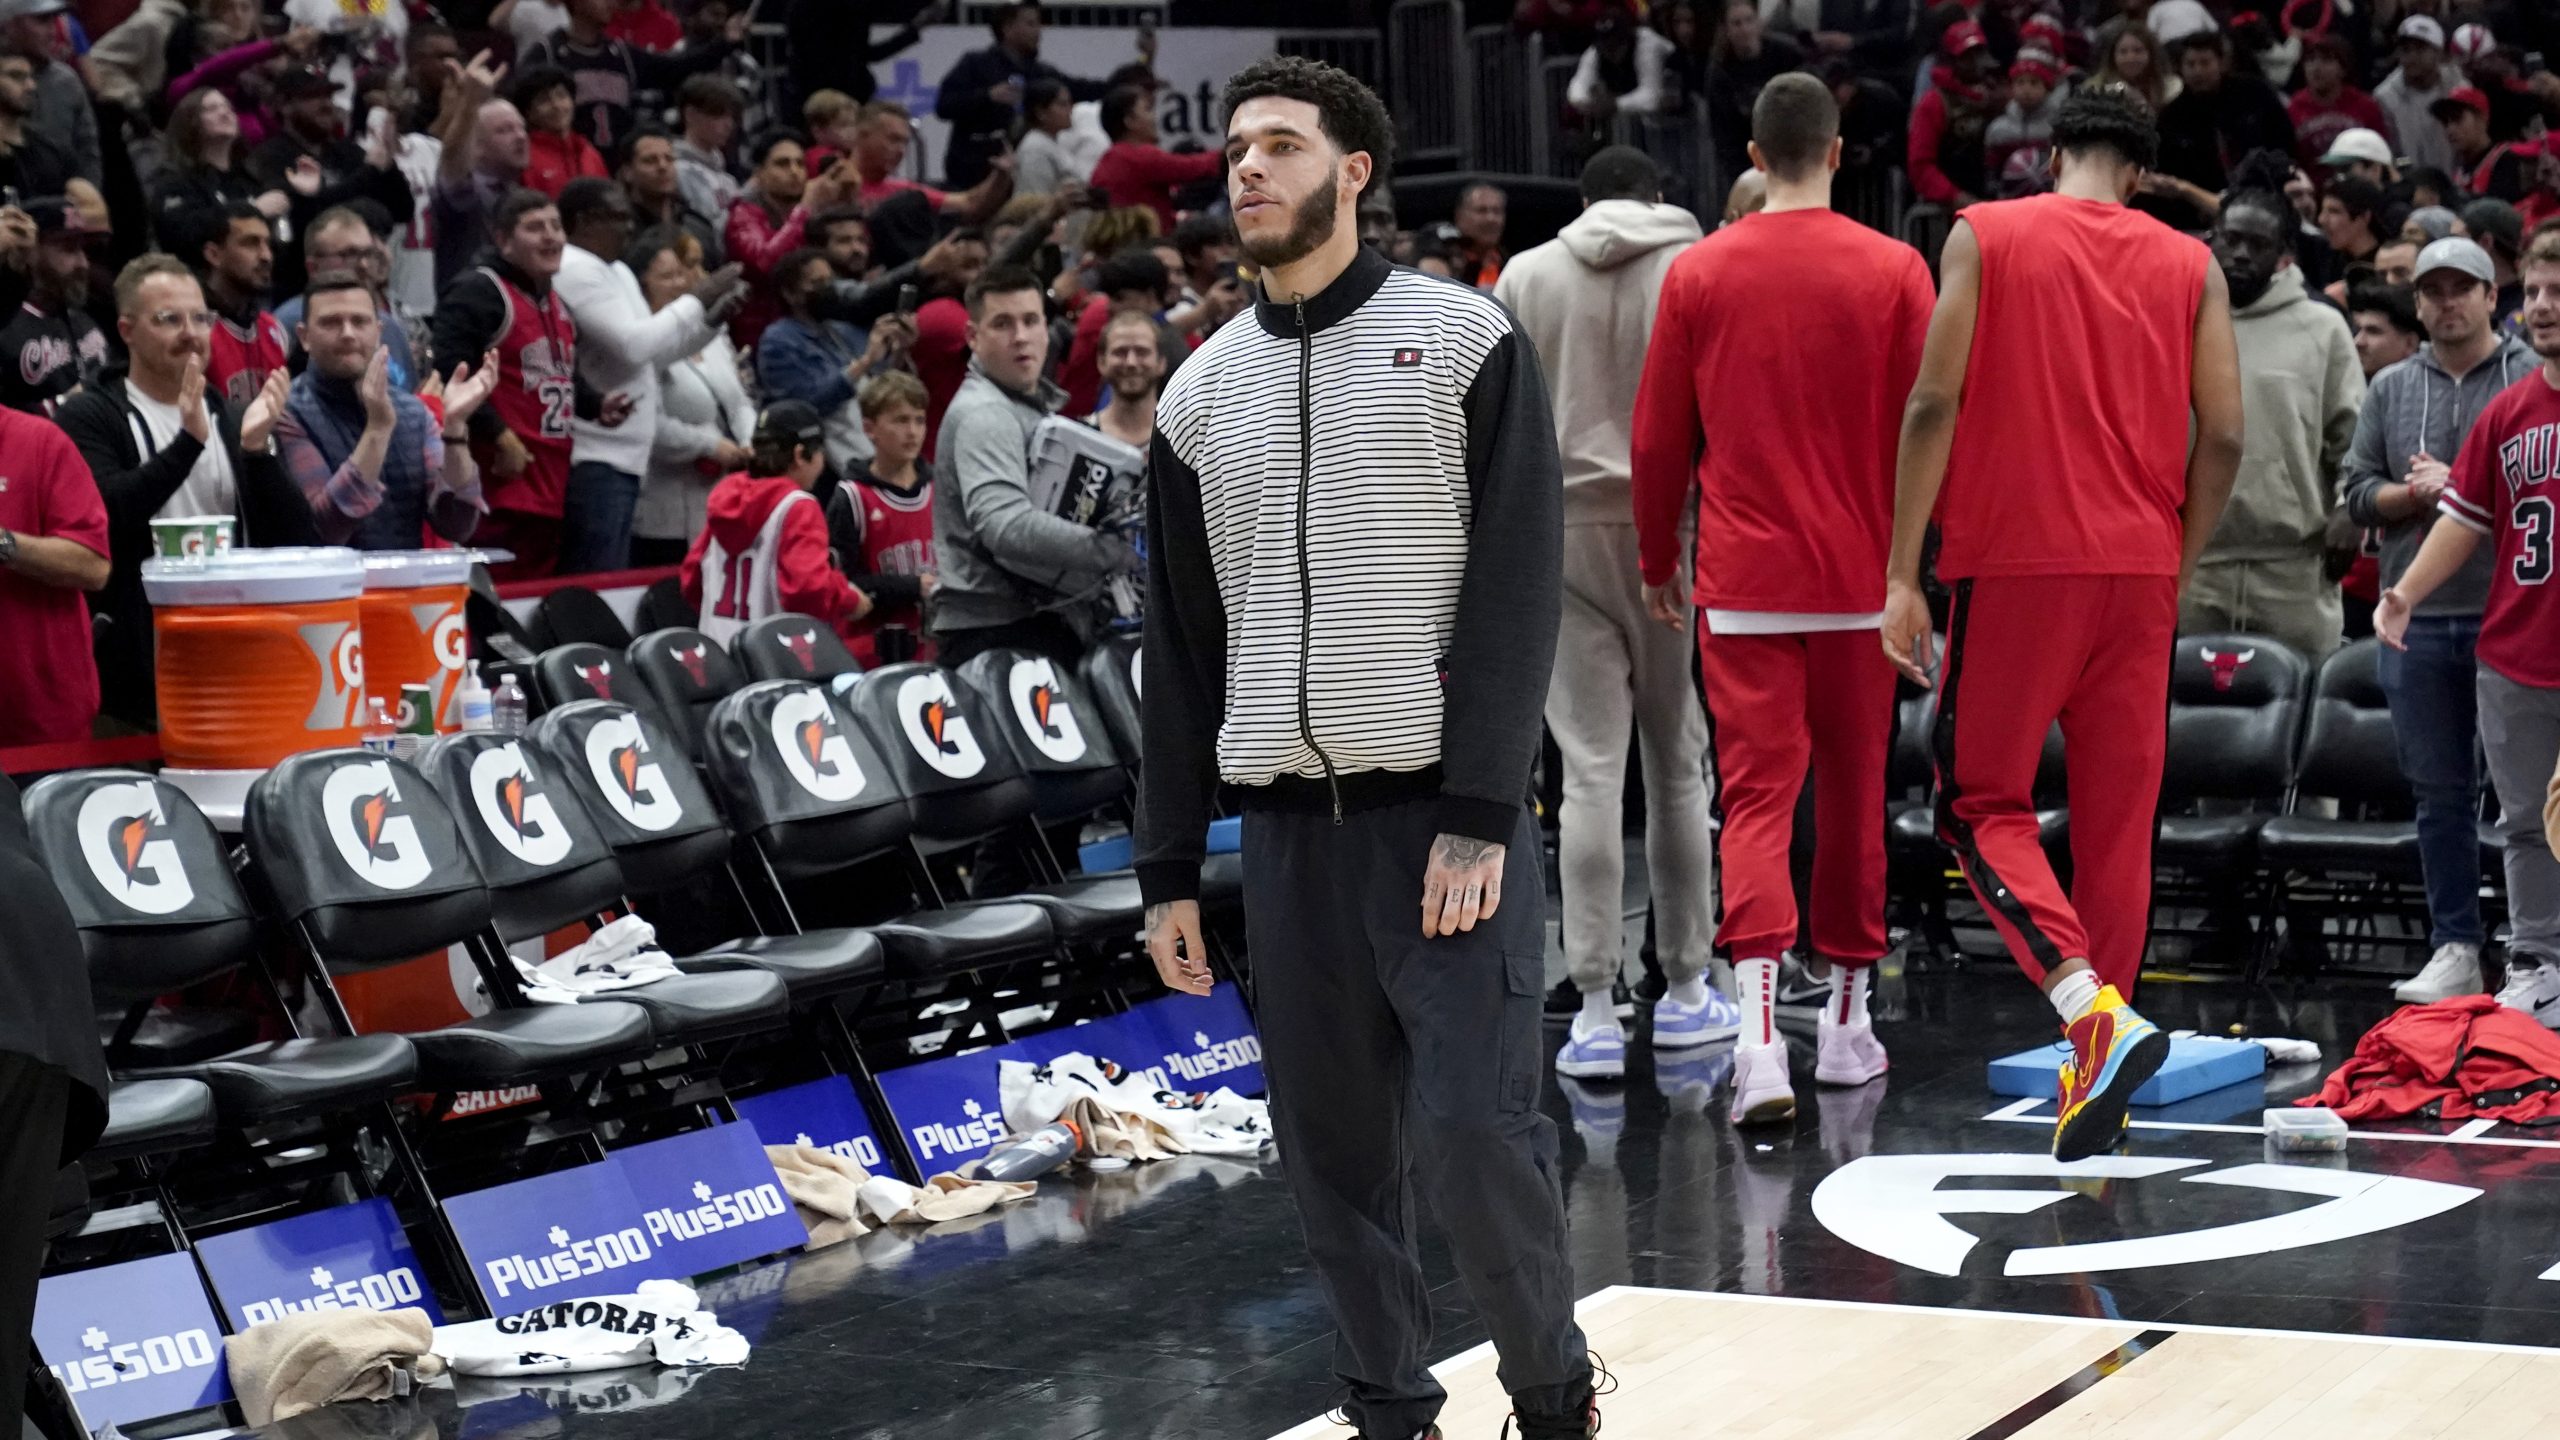 Lonzo Ball says he still hopes to play for Bulls this season